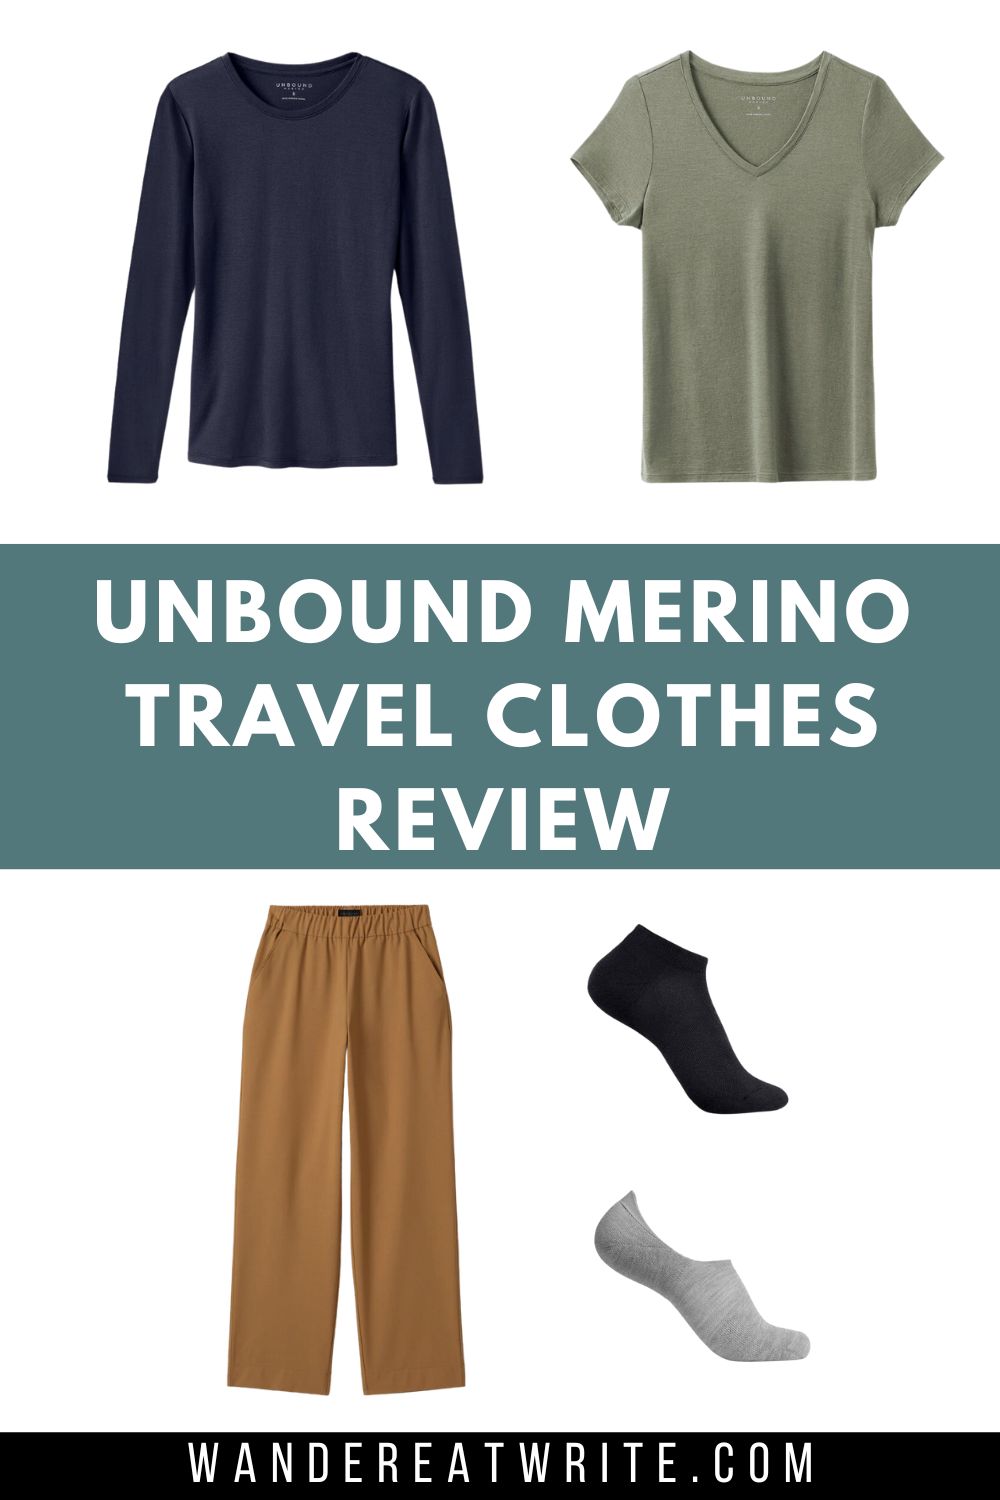 Photo collage title: Unbound Merino Travel Clothes Review. Photos on top row: a navy women's long sleeve crew shirt and an olive women's v-neck t-shirt. Photos on the bottom row: women's lightweight travel pants in tan, ankle socks in black, and no-show socks in gray